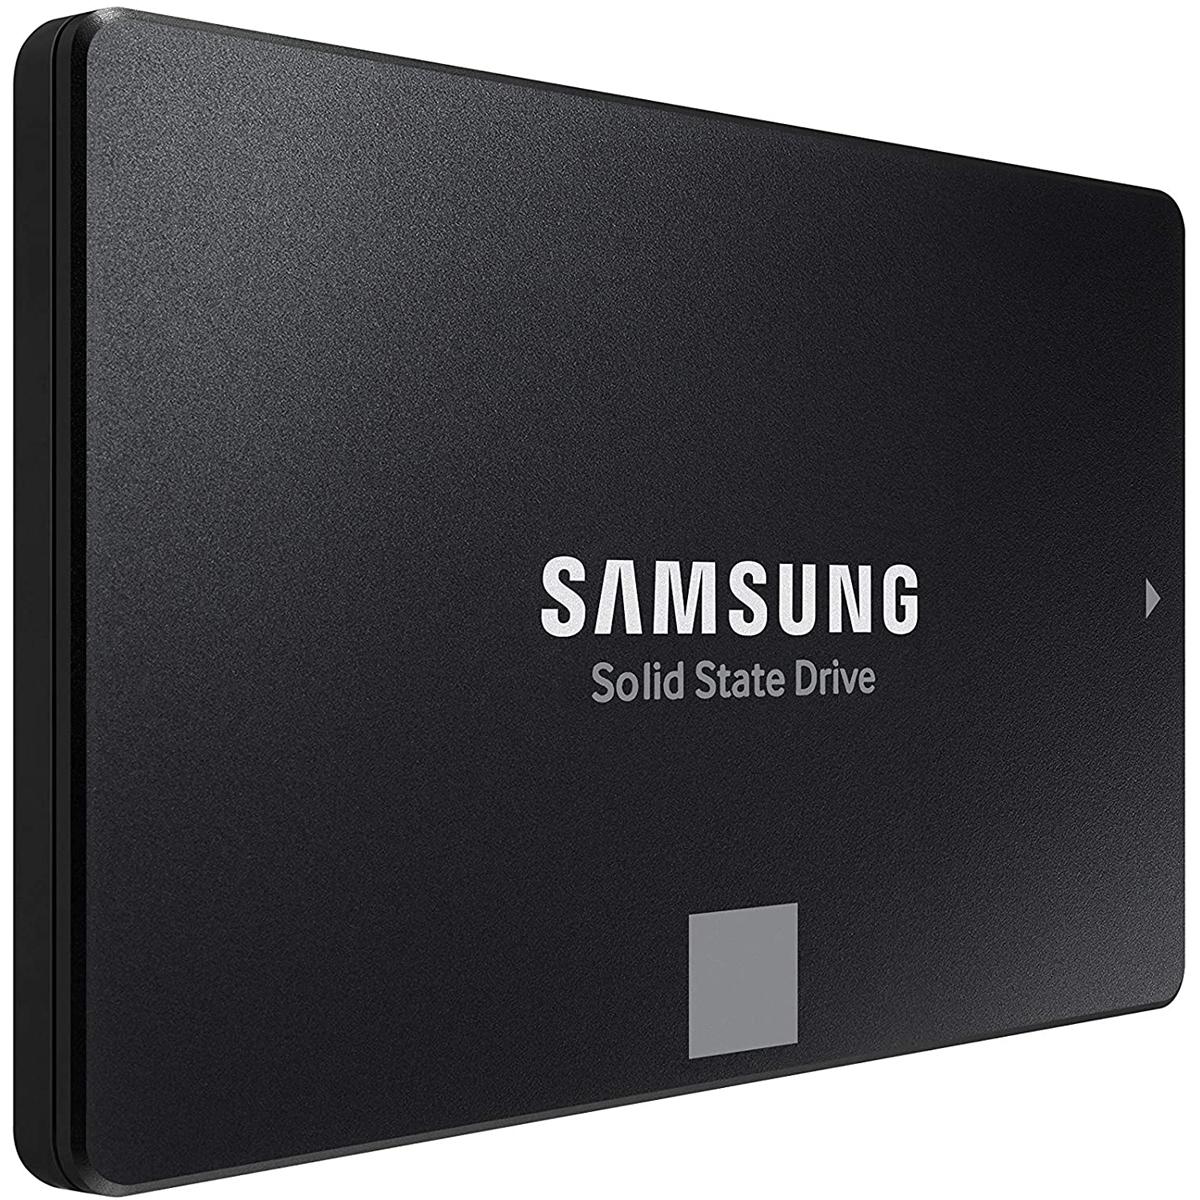 Samsung 500GB 2.5in 870 EVO SATA III SSD Solid State Drive for $59.99 Shipped